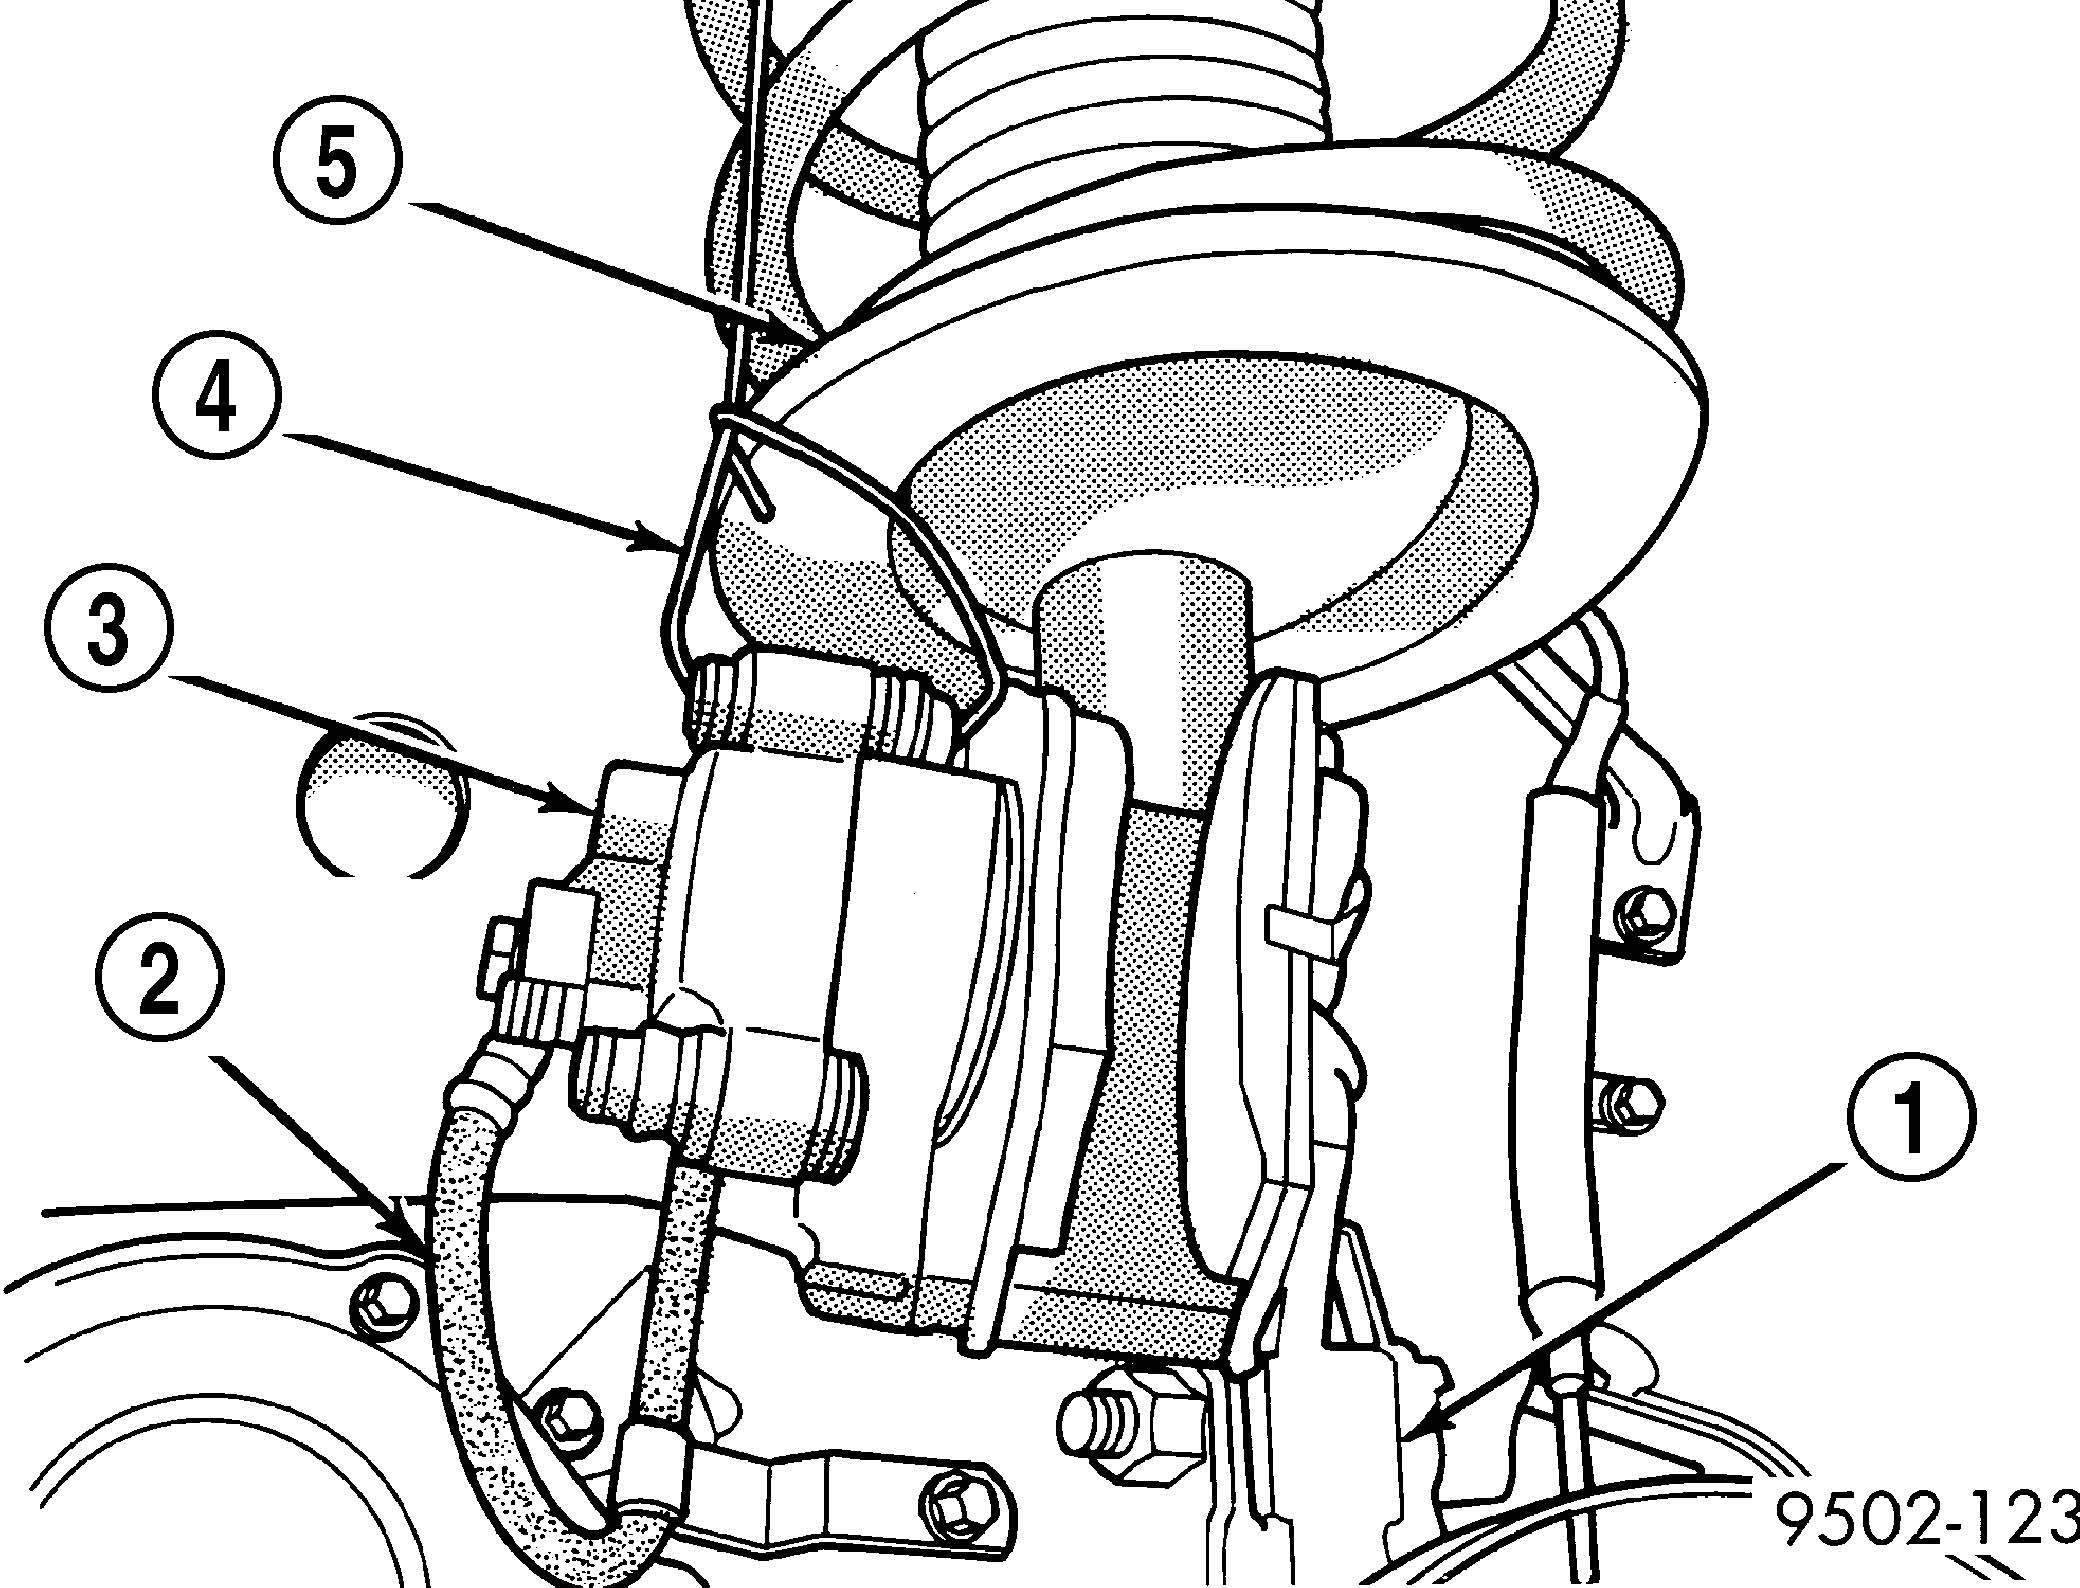 Fig. 2 Properly Supported Disc Brake Caliper - Typical